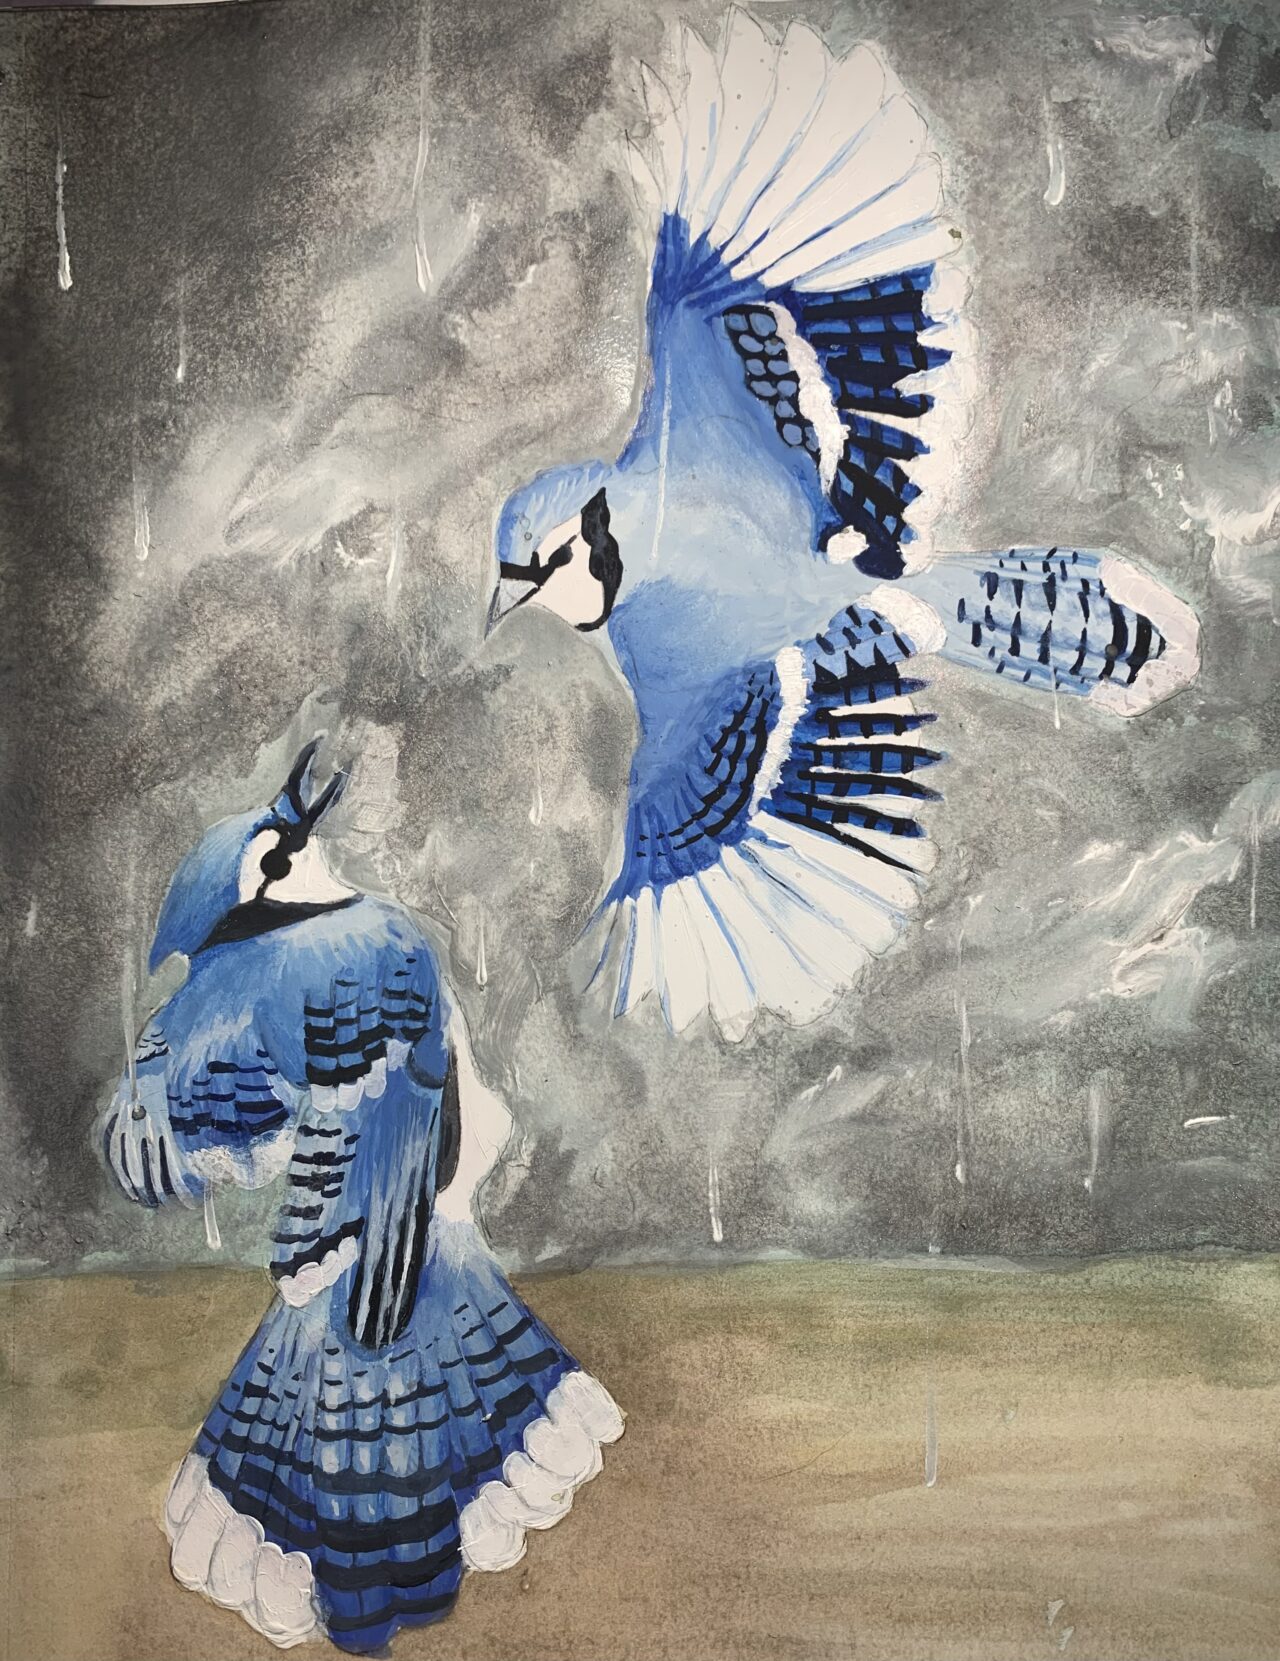 "Blue Jays fighting over the feeder" by Kolby Tally